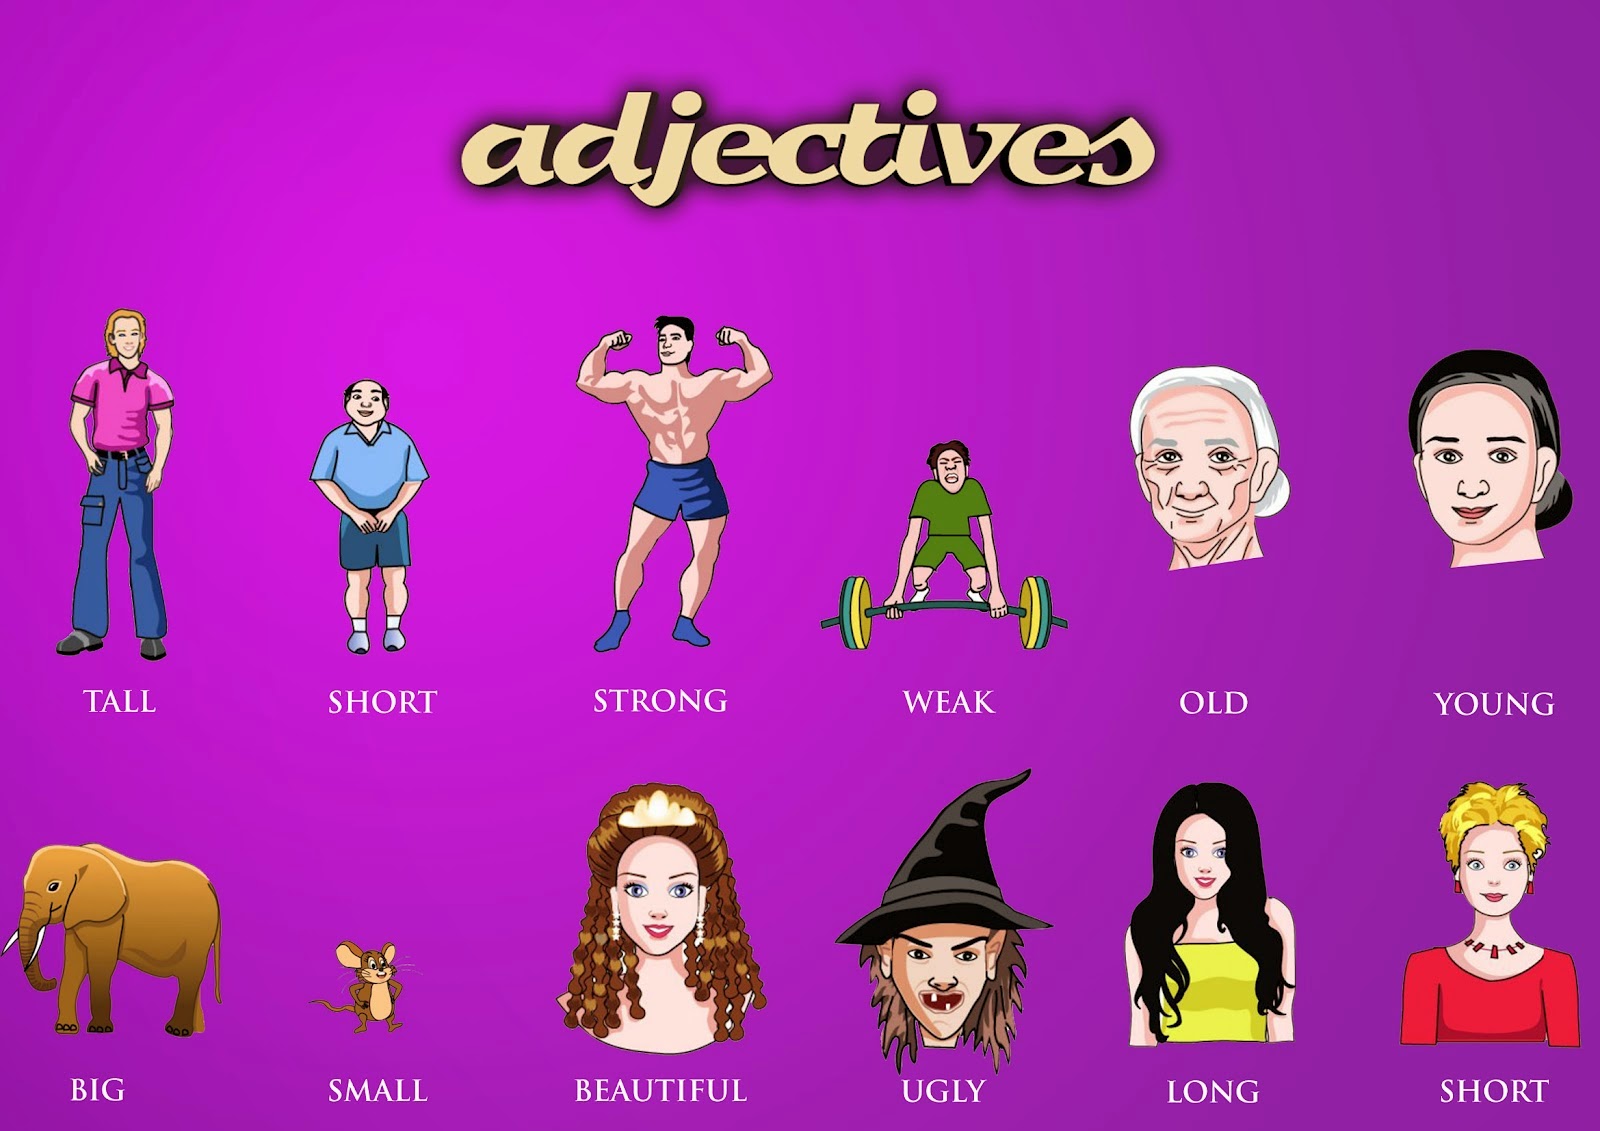 adjectives-and-opposites-level-2-english-adjectives-english-verbs